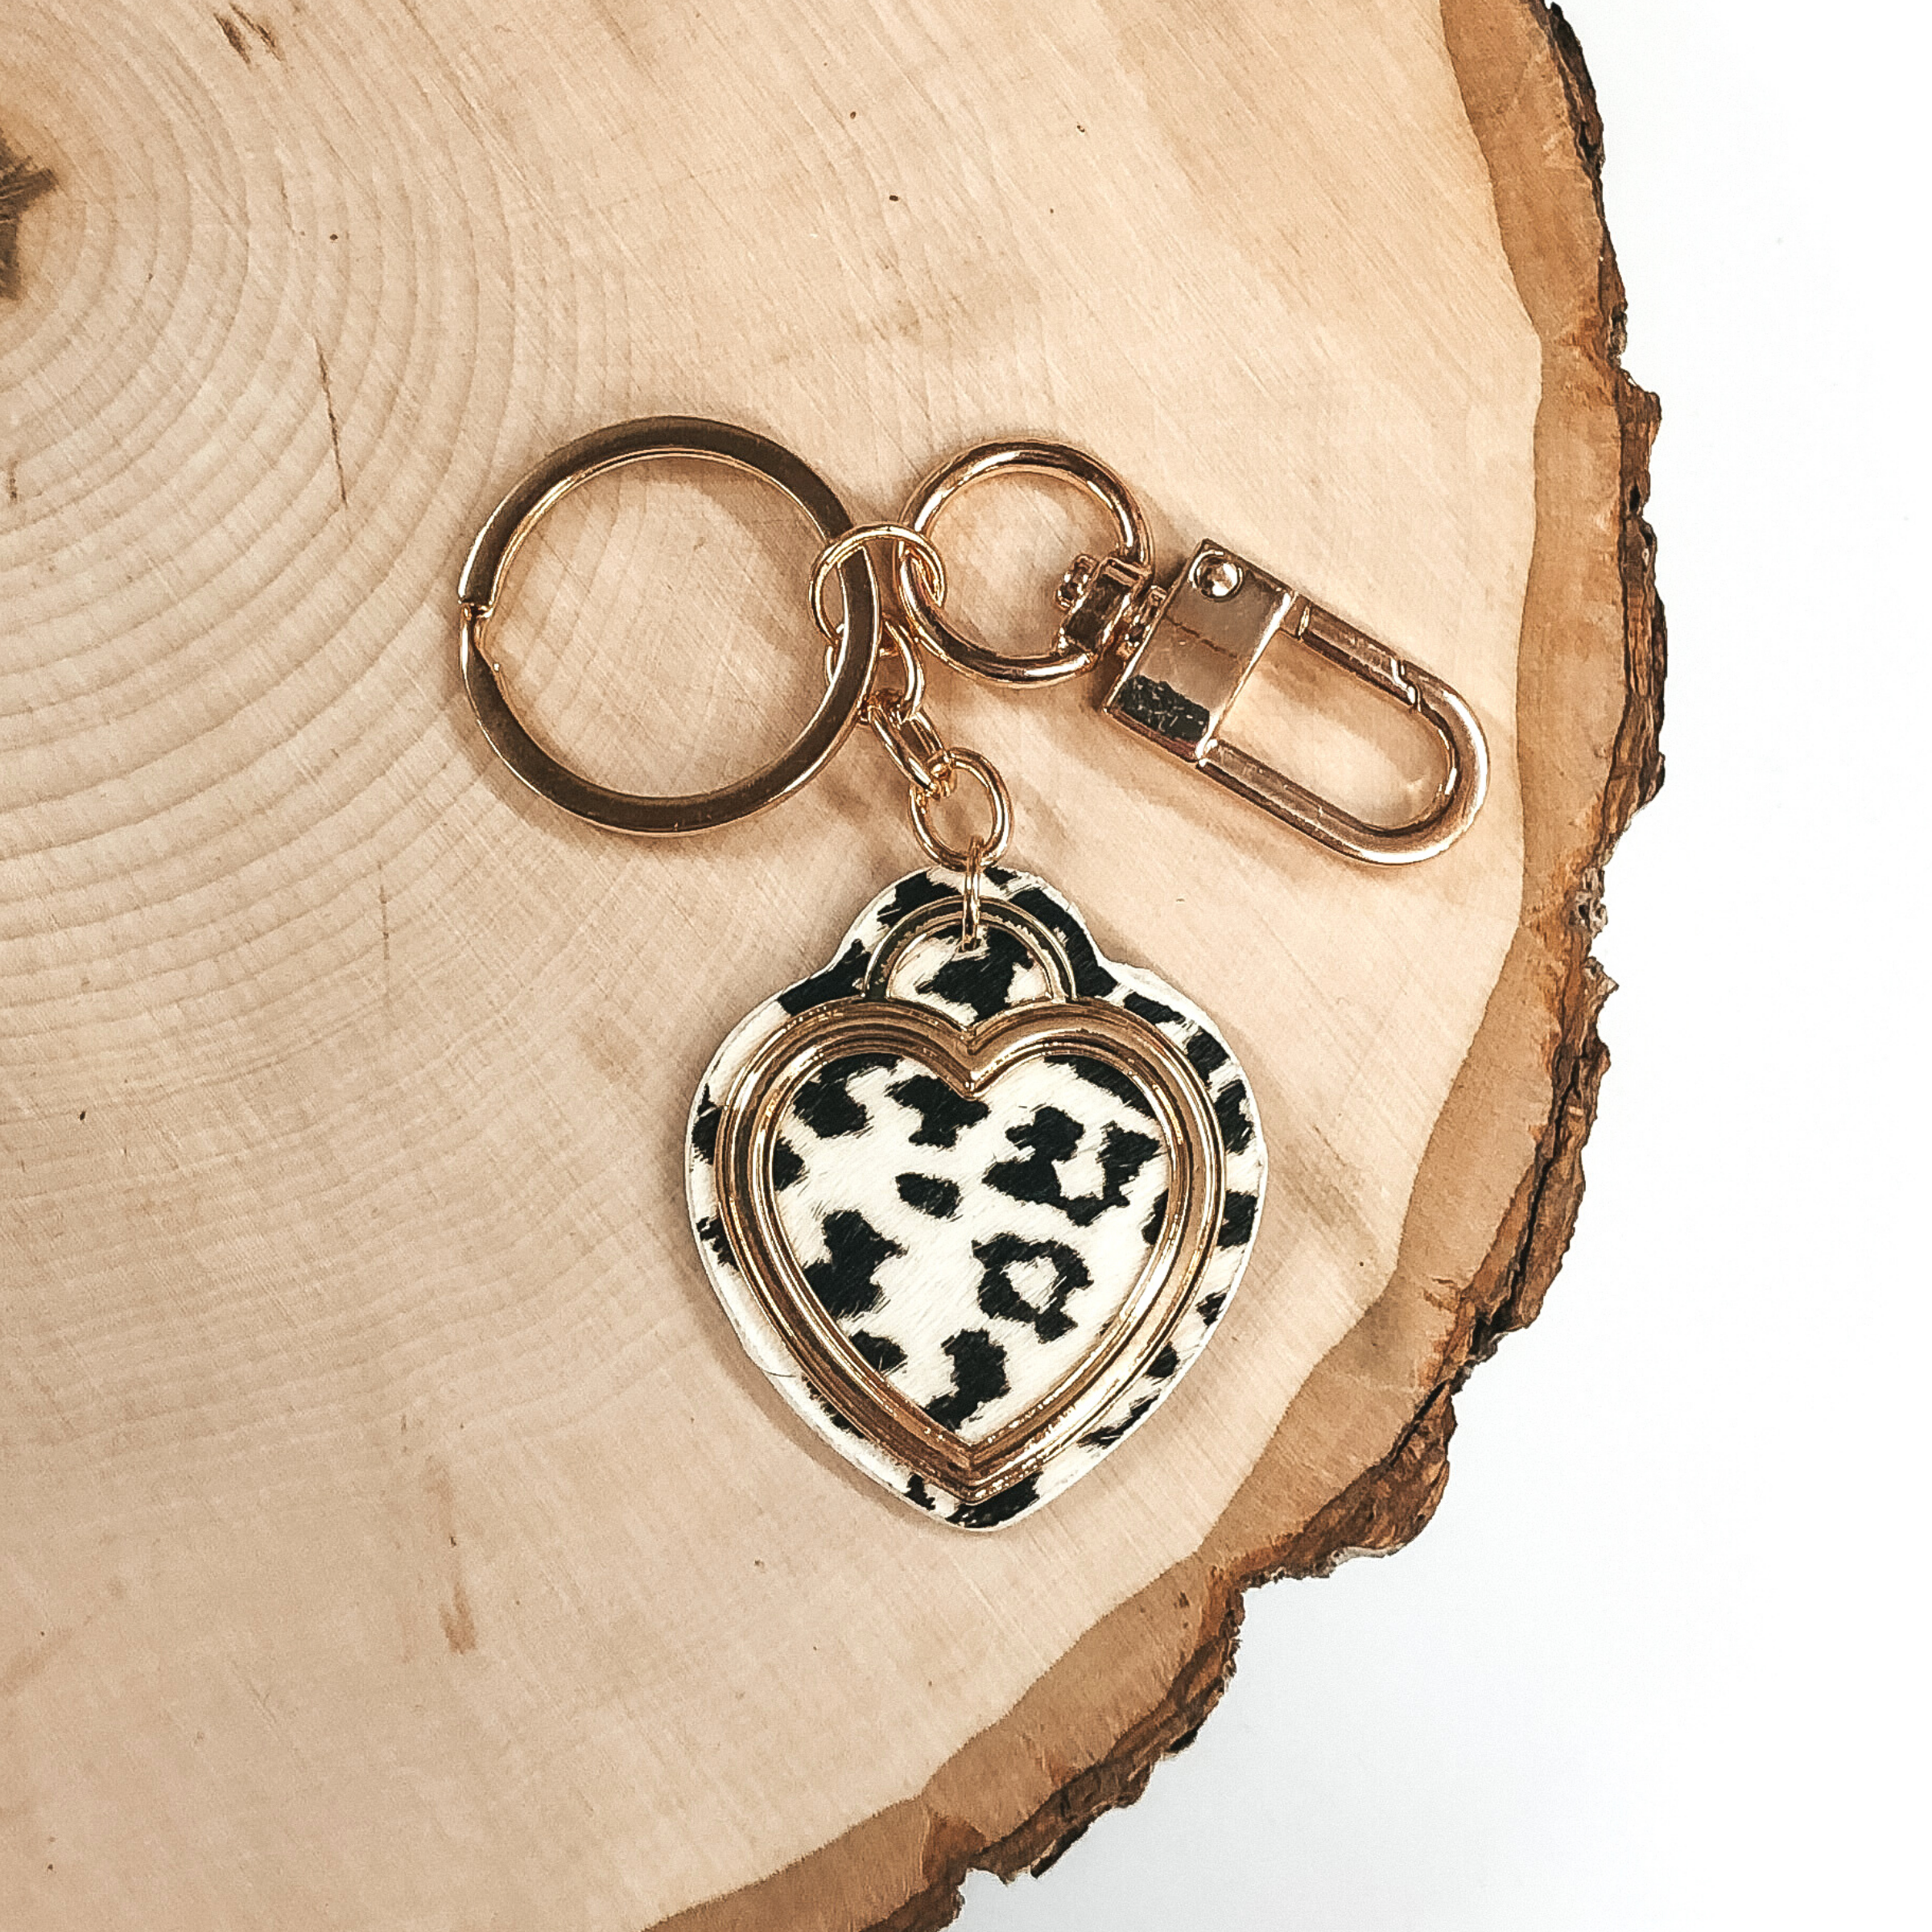 Gold Heart on Leopard Print Key Chain in White - Giddy Up Glamour Boutique